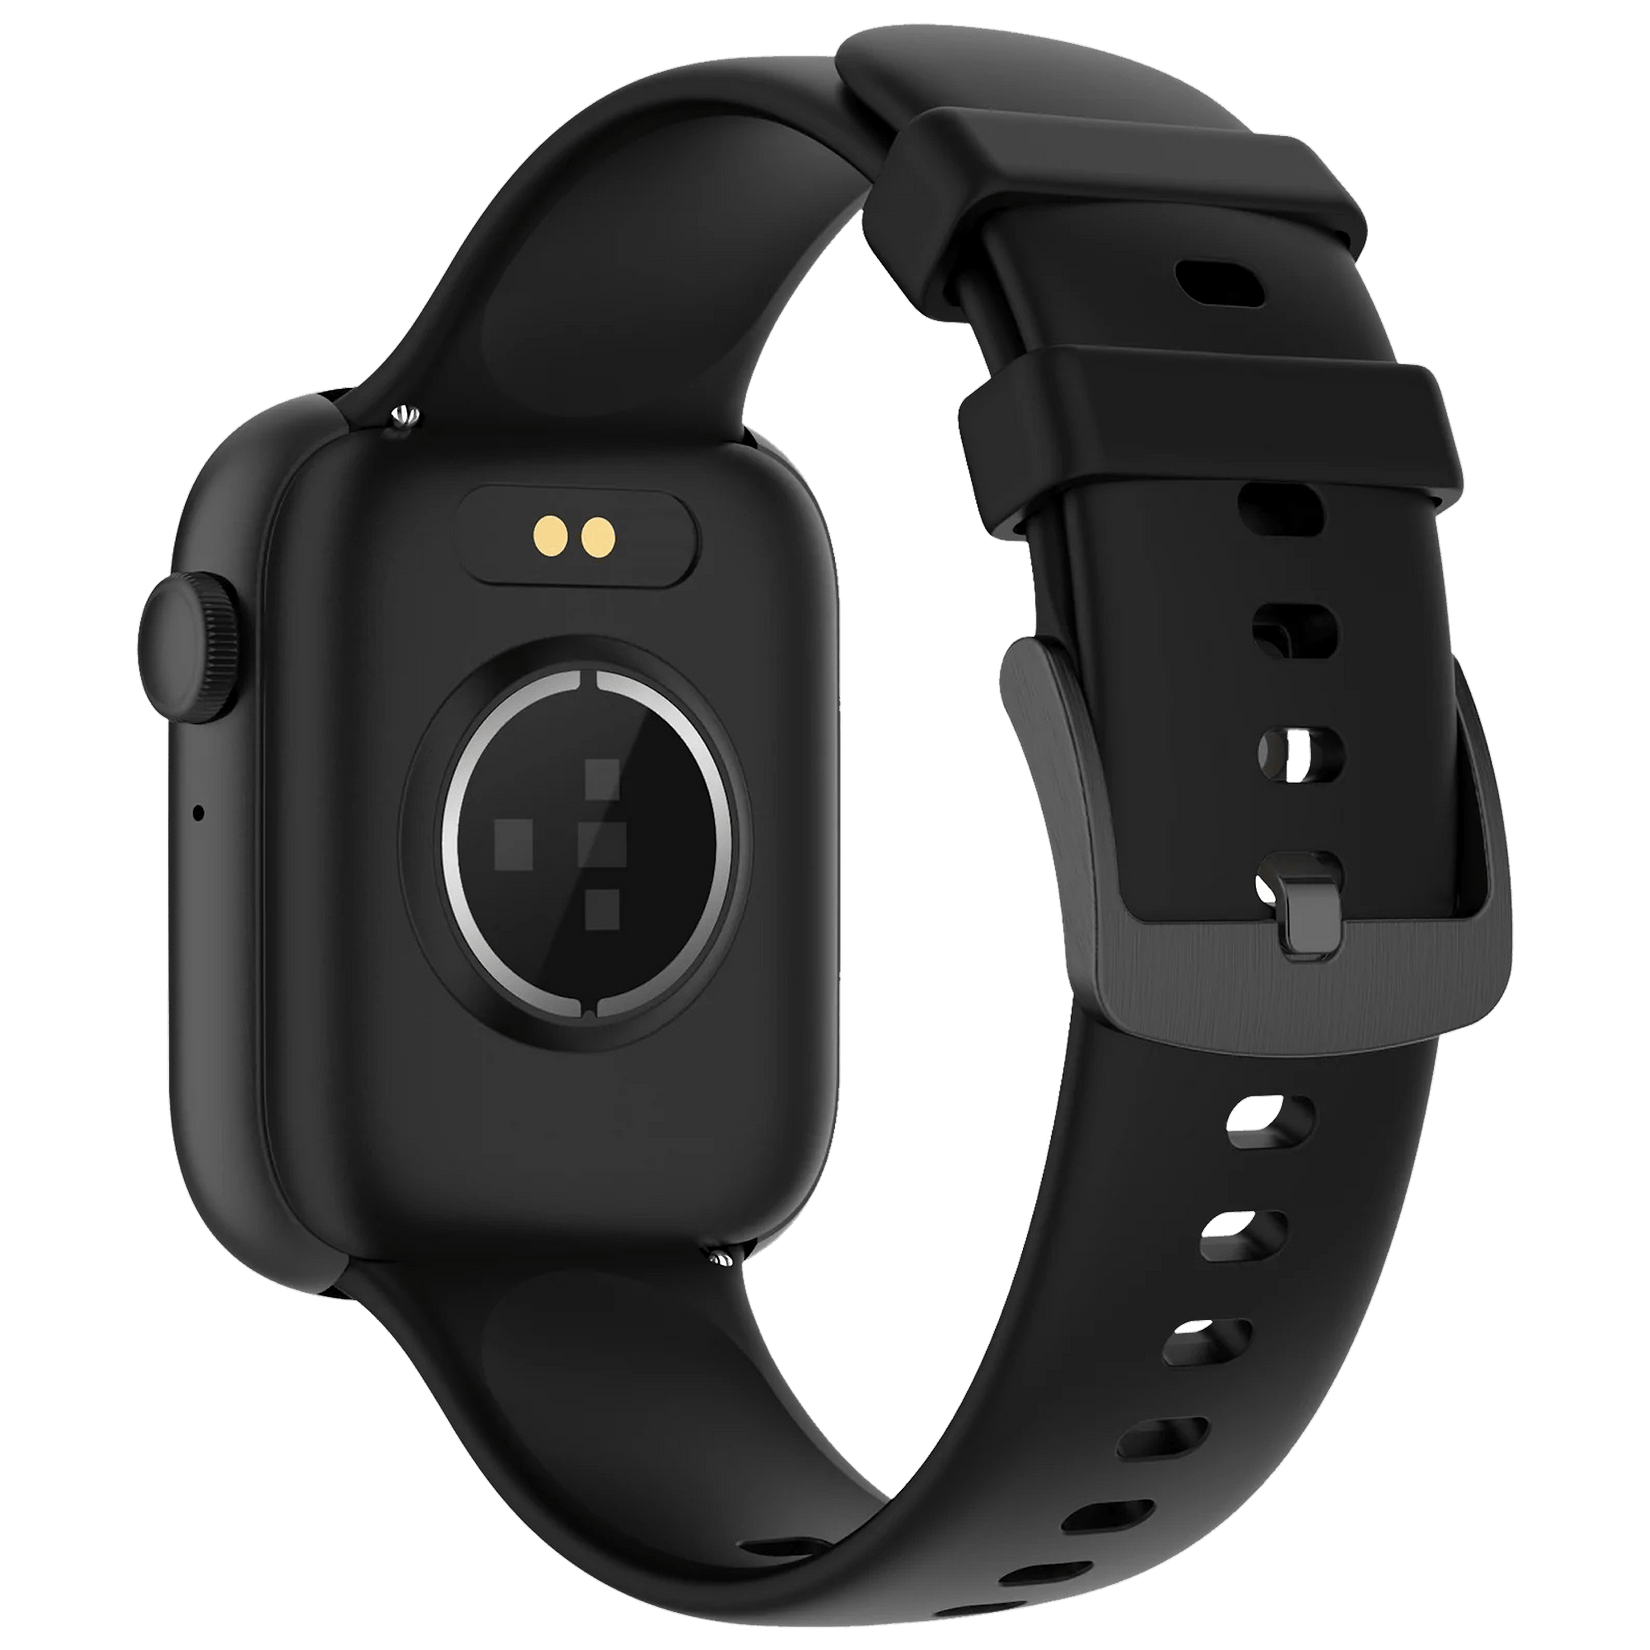 Fire-Boltt Ring 3 smartwatch launched in India | Technology & Science News,  Times Now